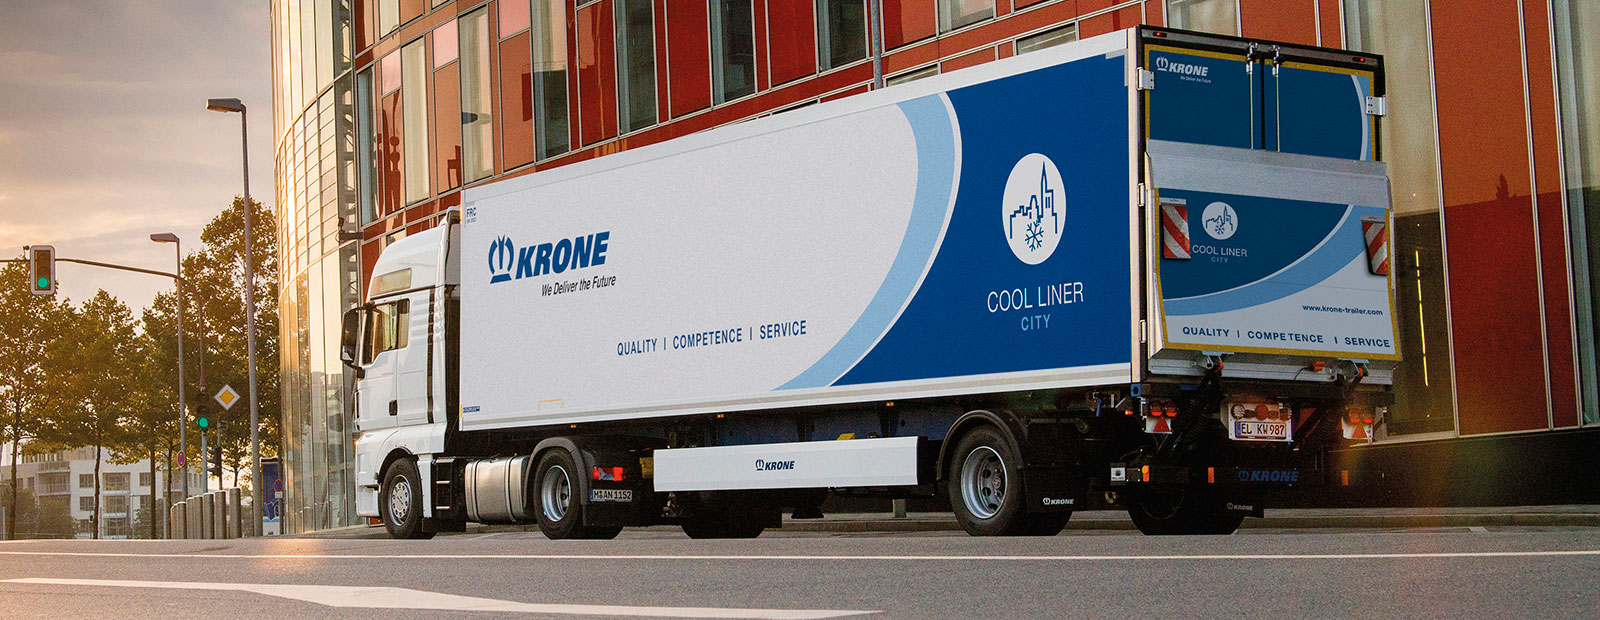 „Krone Cool Liner City“